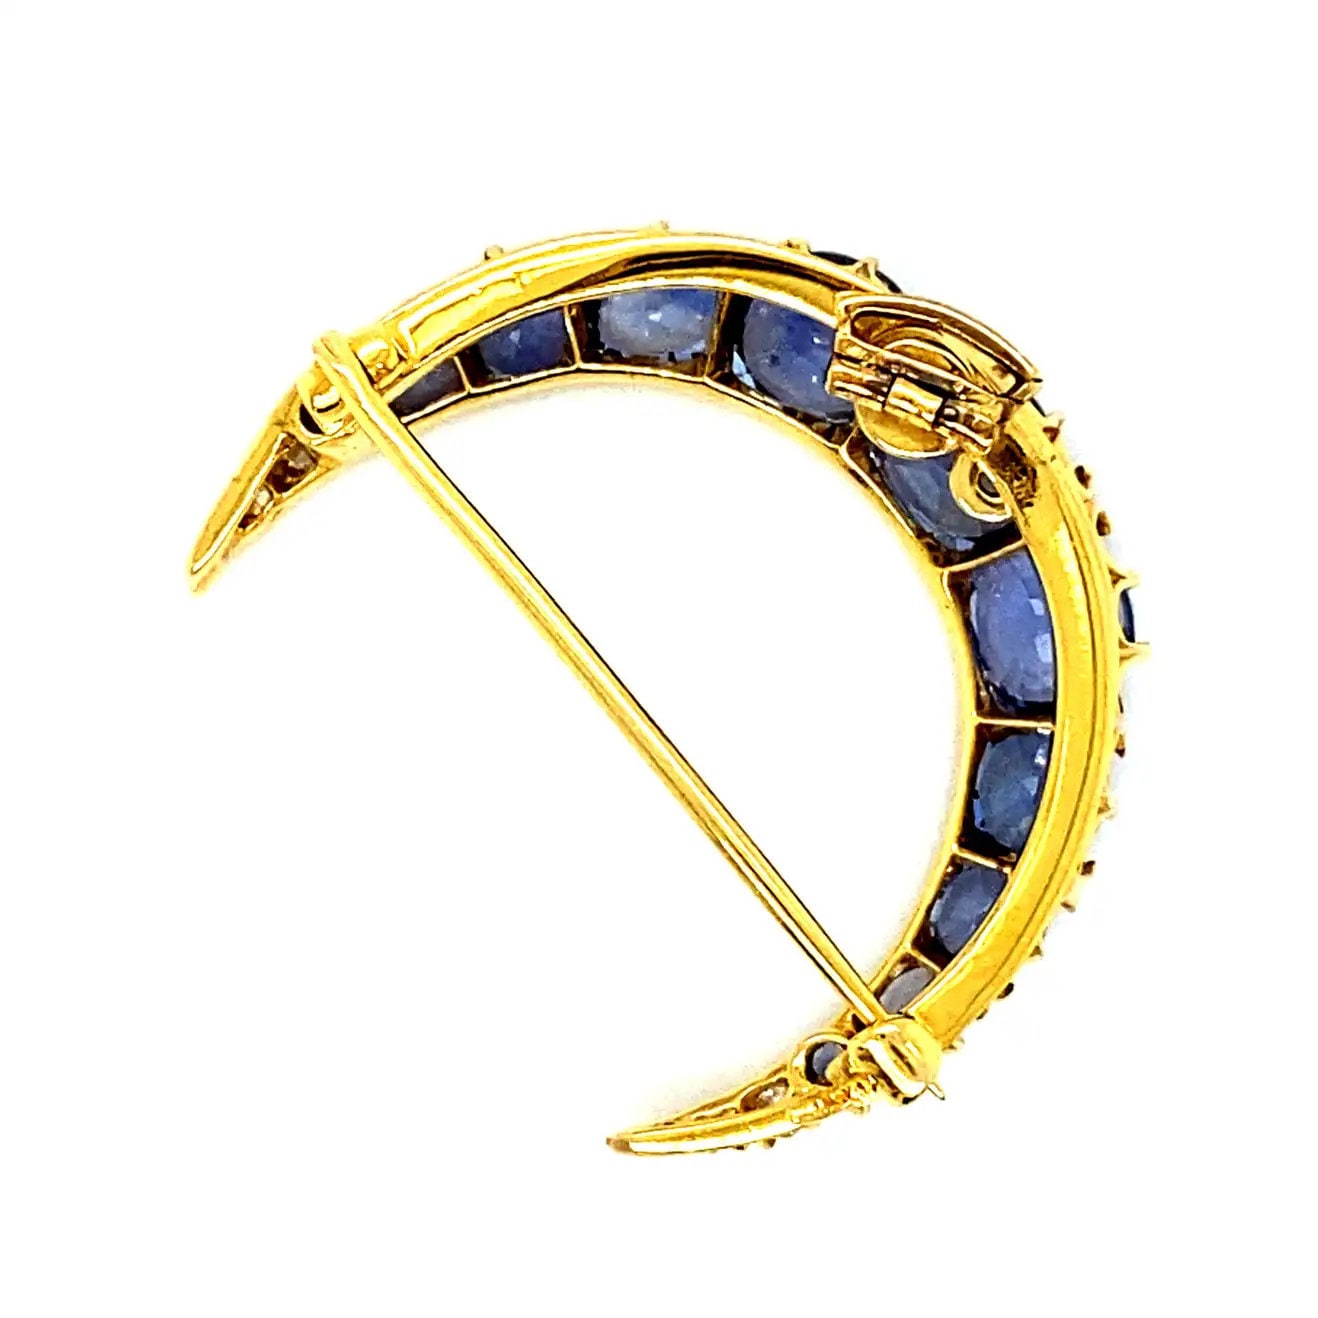 Victorian Antique Tiffany & Co Sapphire Brooch/ Pendant in 18K Gold.